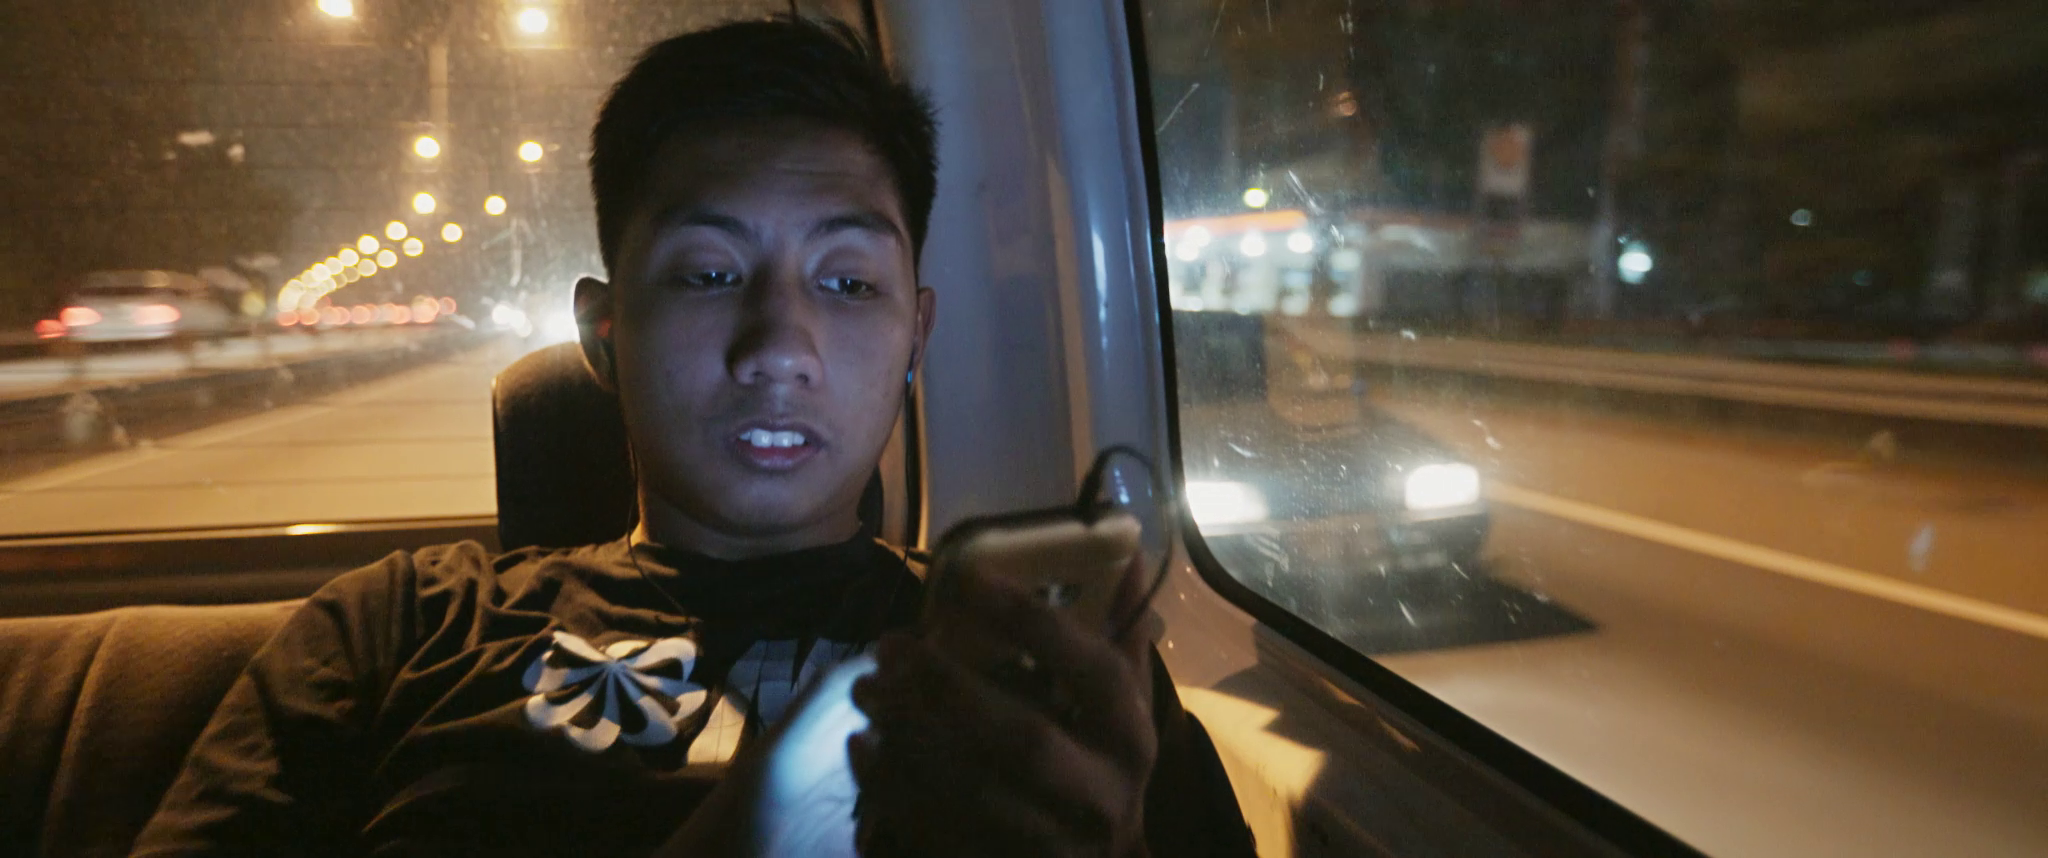 Blind footballer Asri is traveling in a van at night, drawn to his mobile phone.